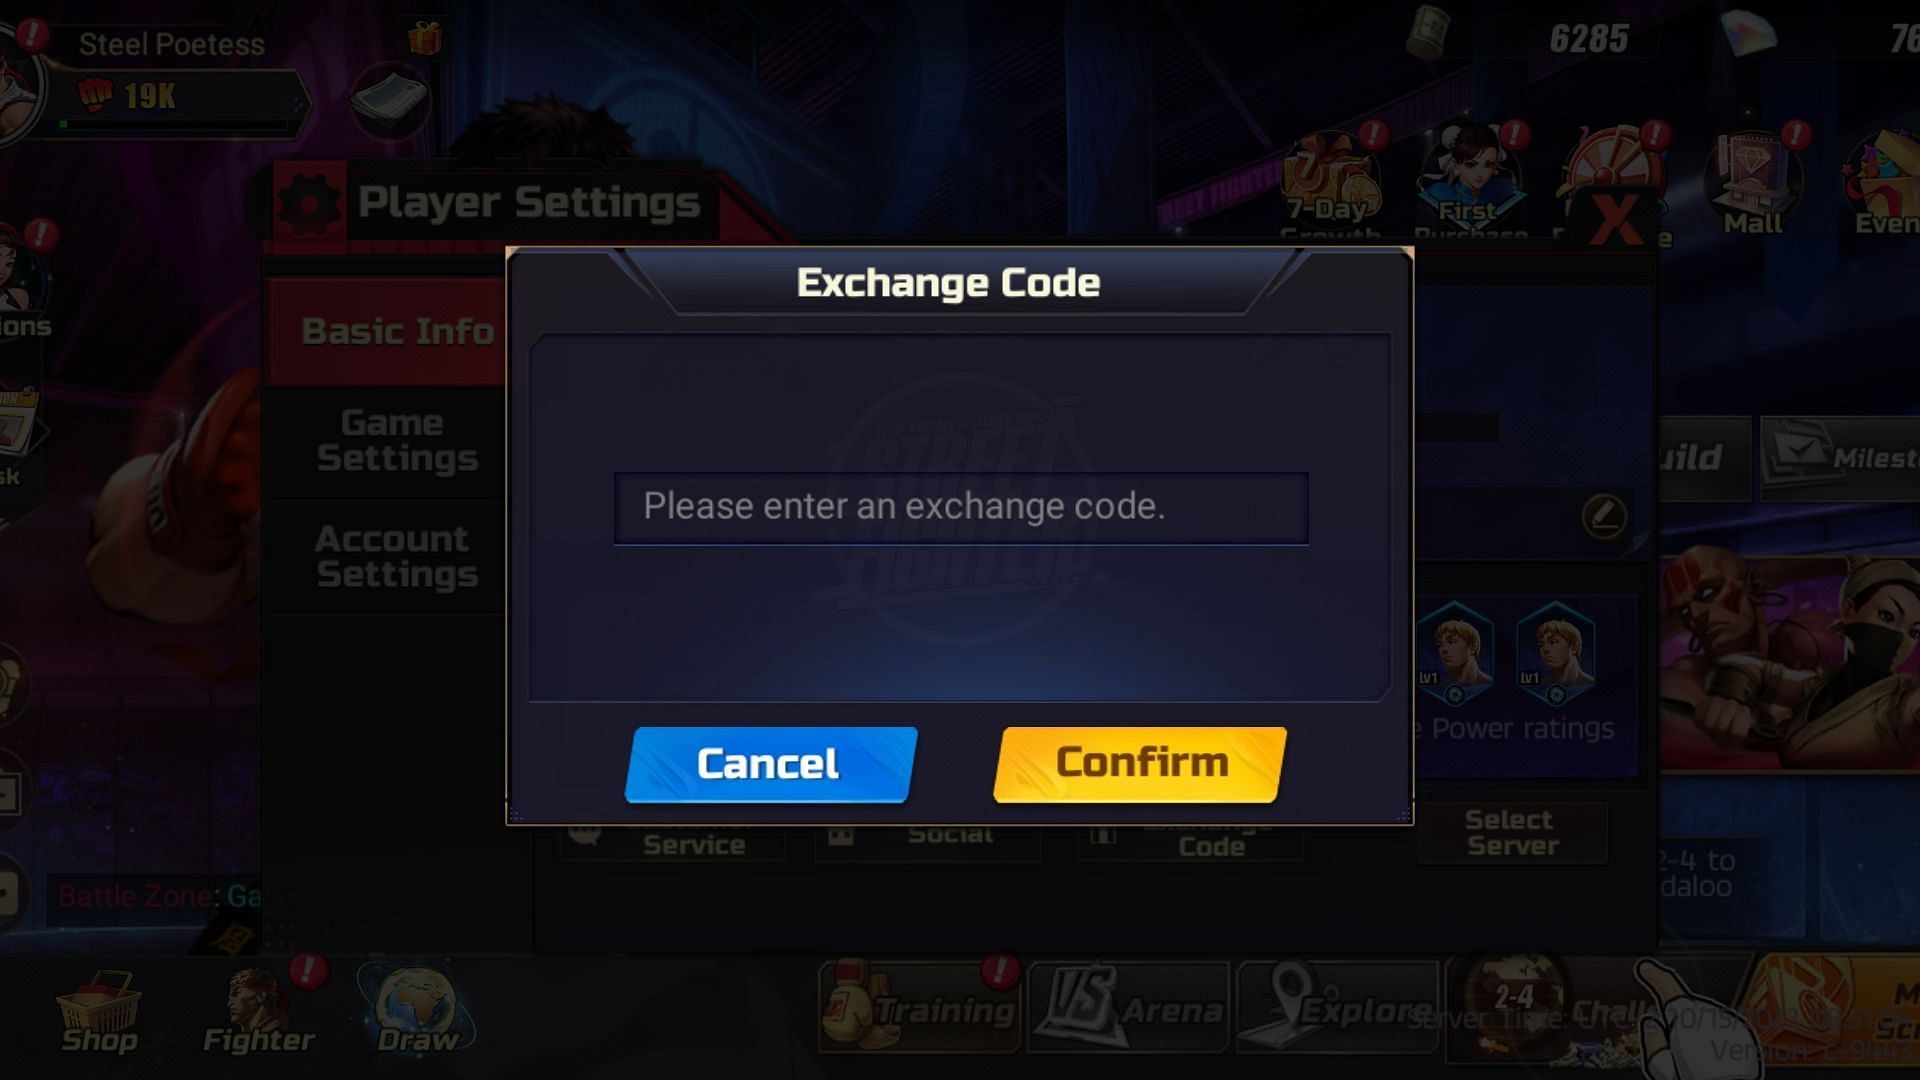 Type the code in the box and hit the Confirm button to claim free Gems (Image via Crunchyroll)